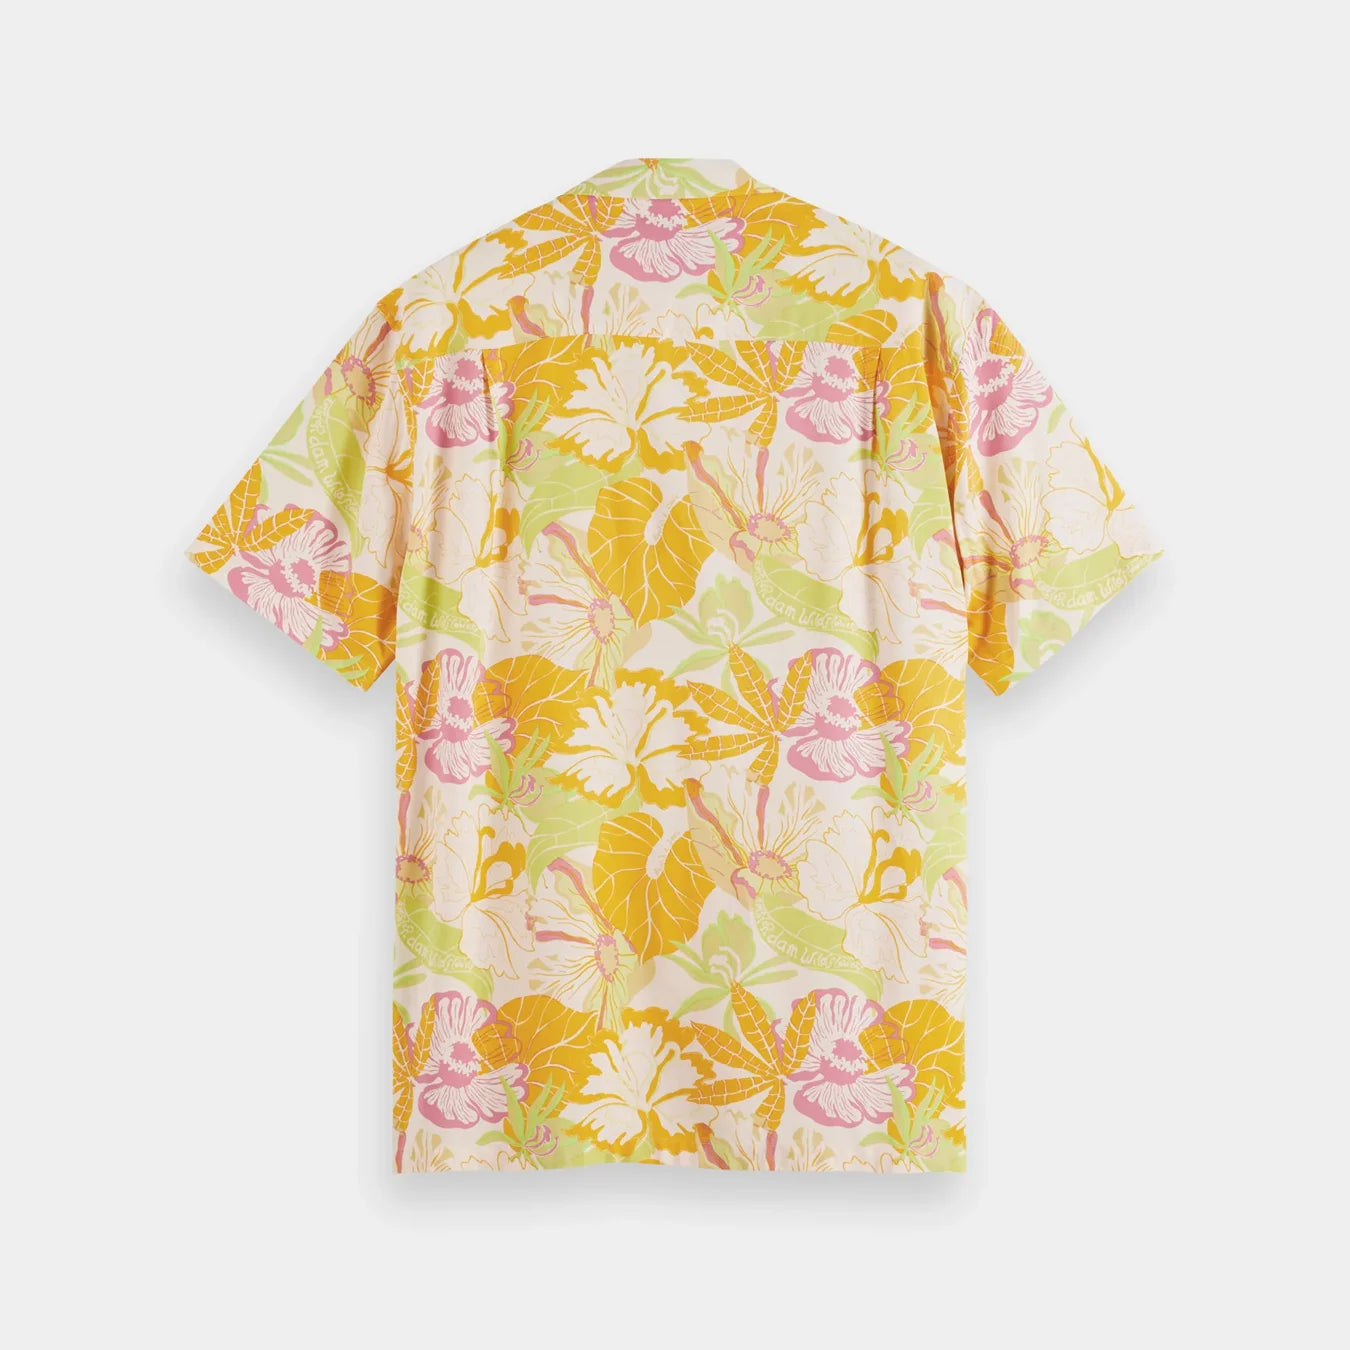 'Scotch & Soda Short Sleeve Floral Printed Camp Shirt' in 'Yellow' colour